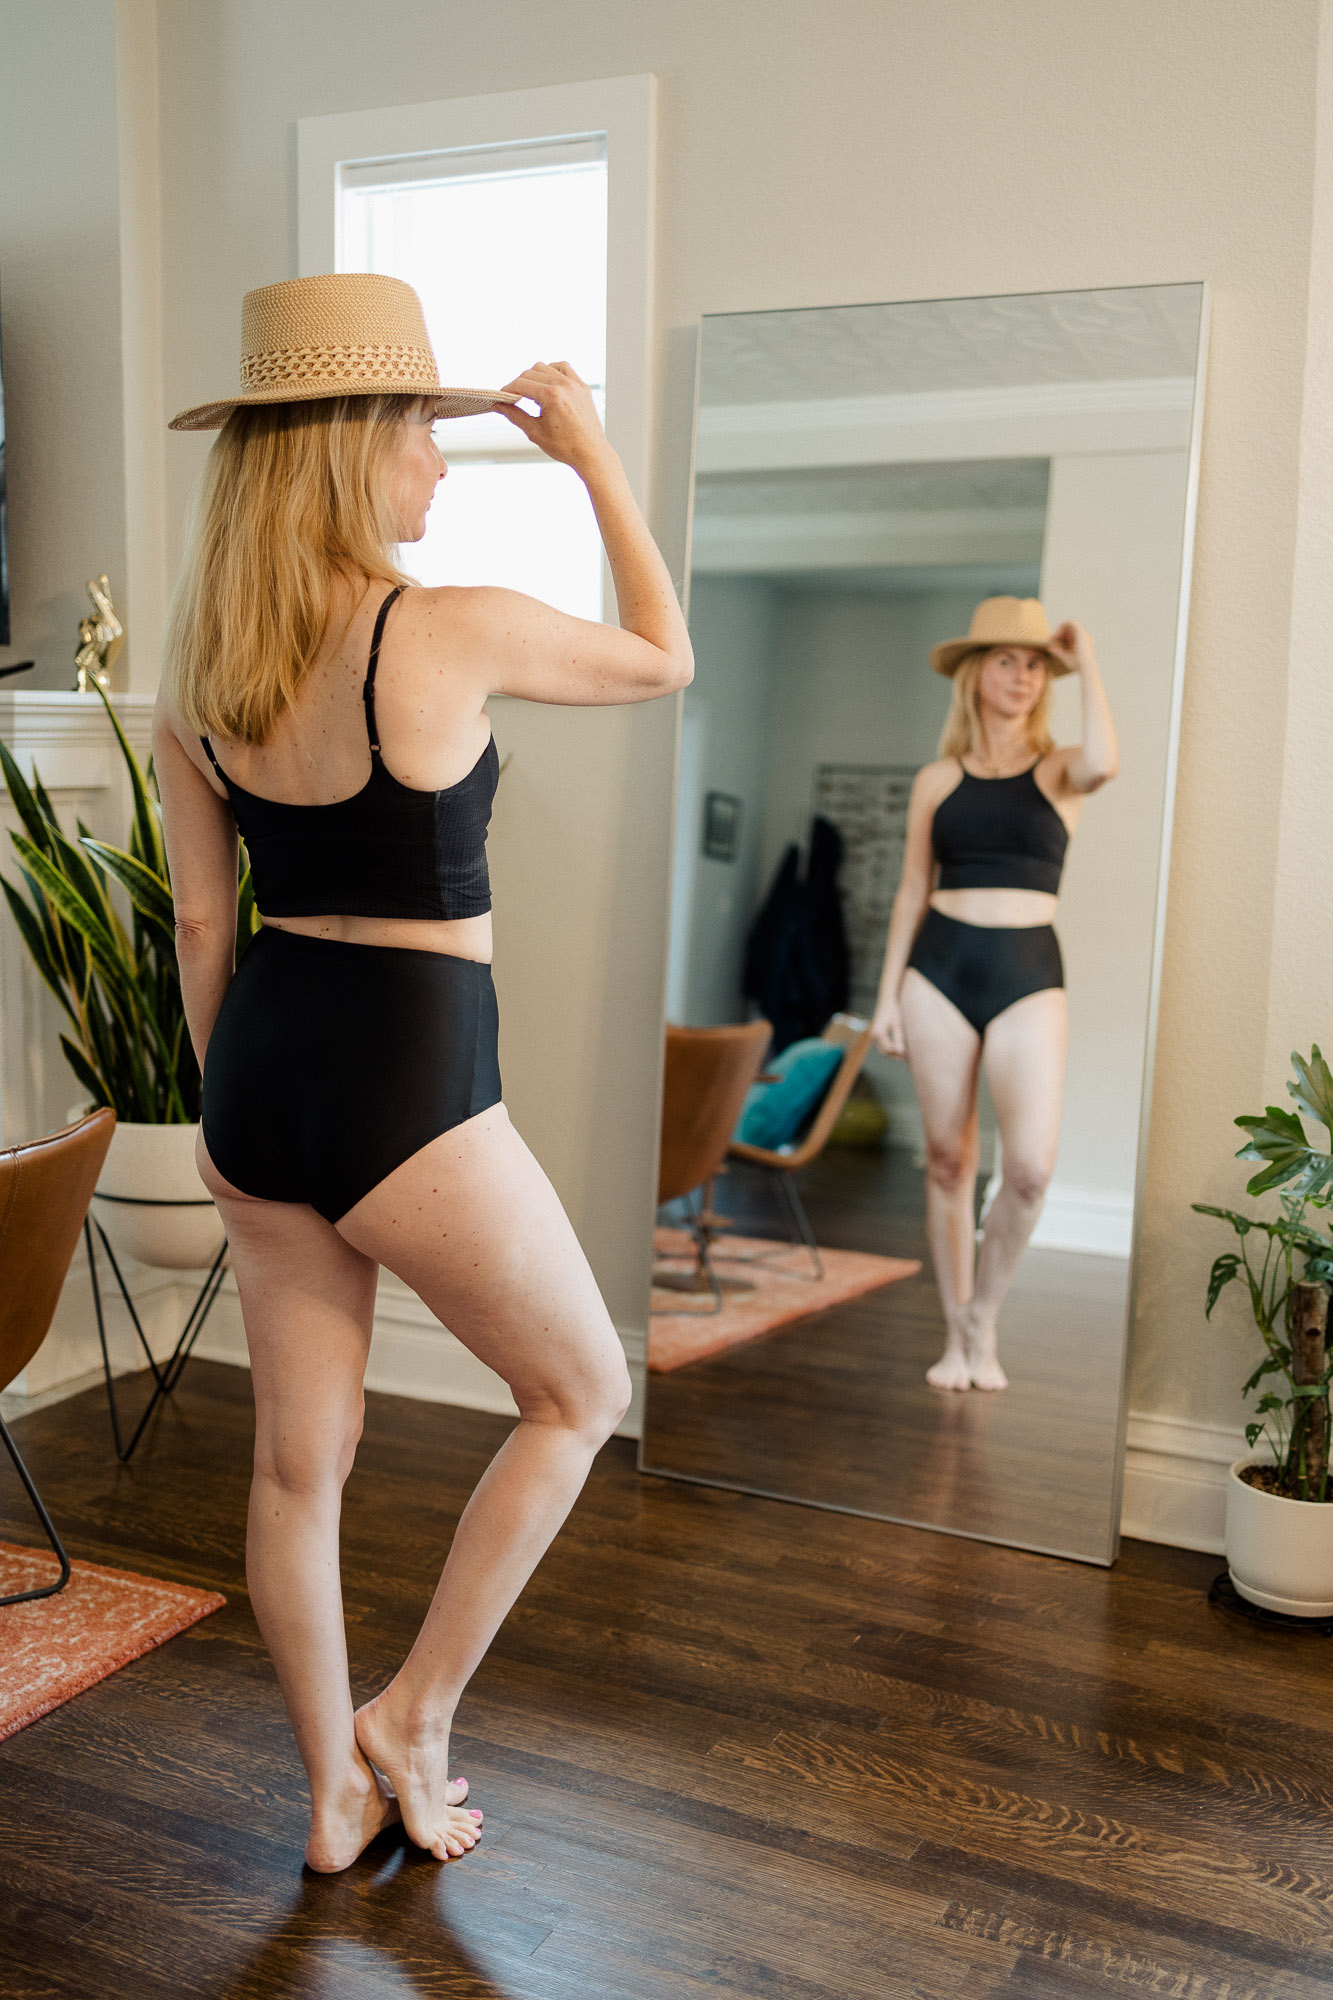 Wearing a hat and two piece Lululemon swimsuit in black.